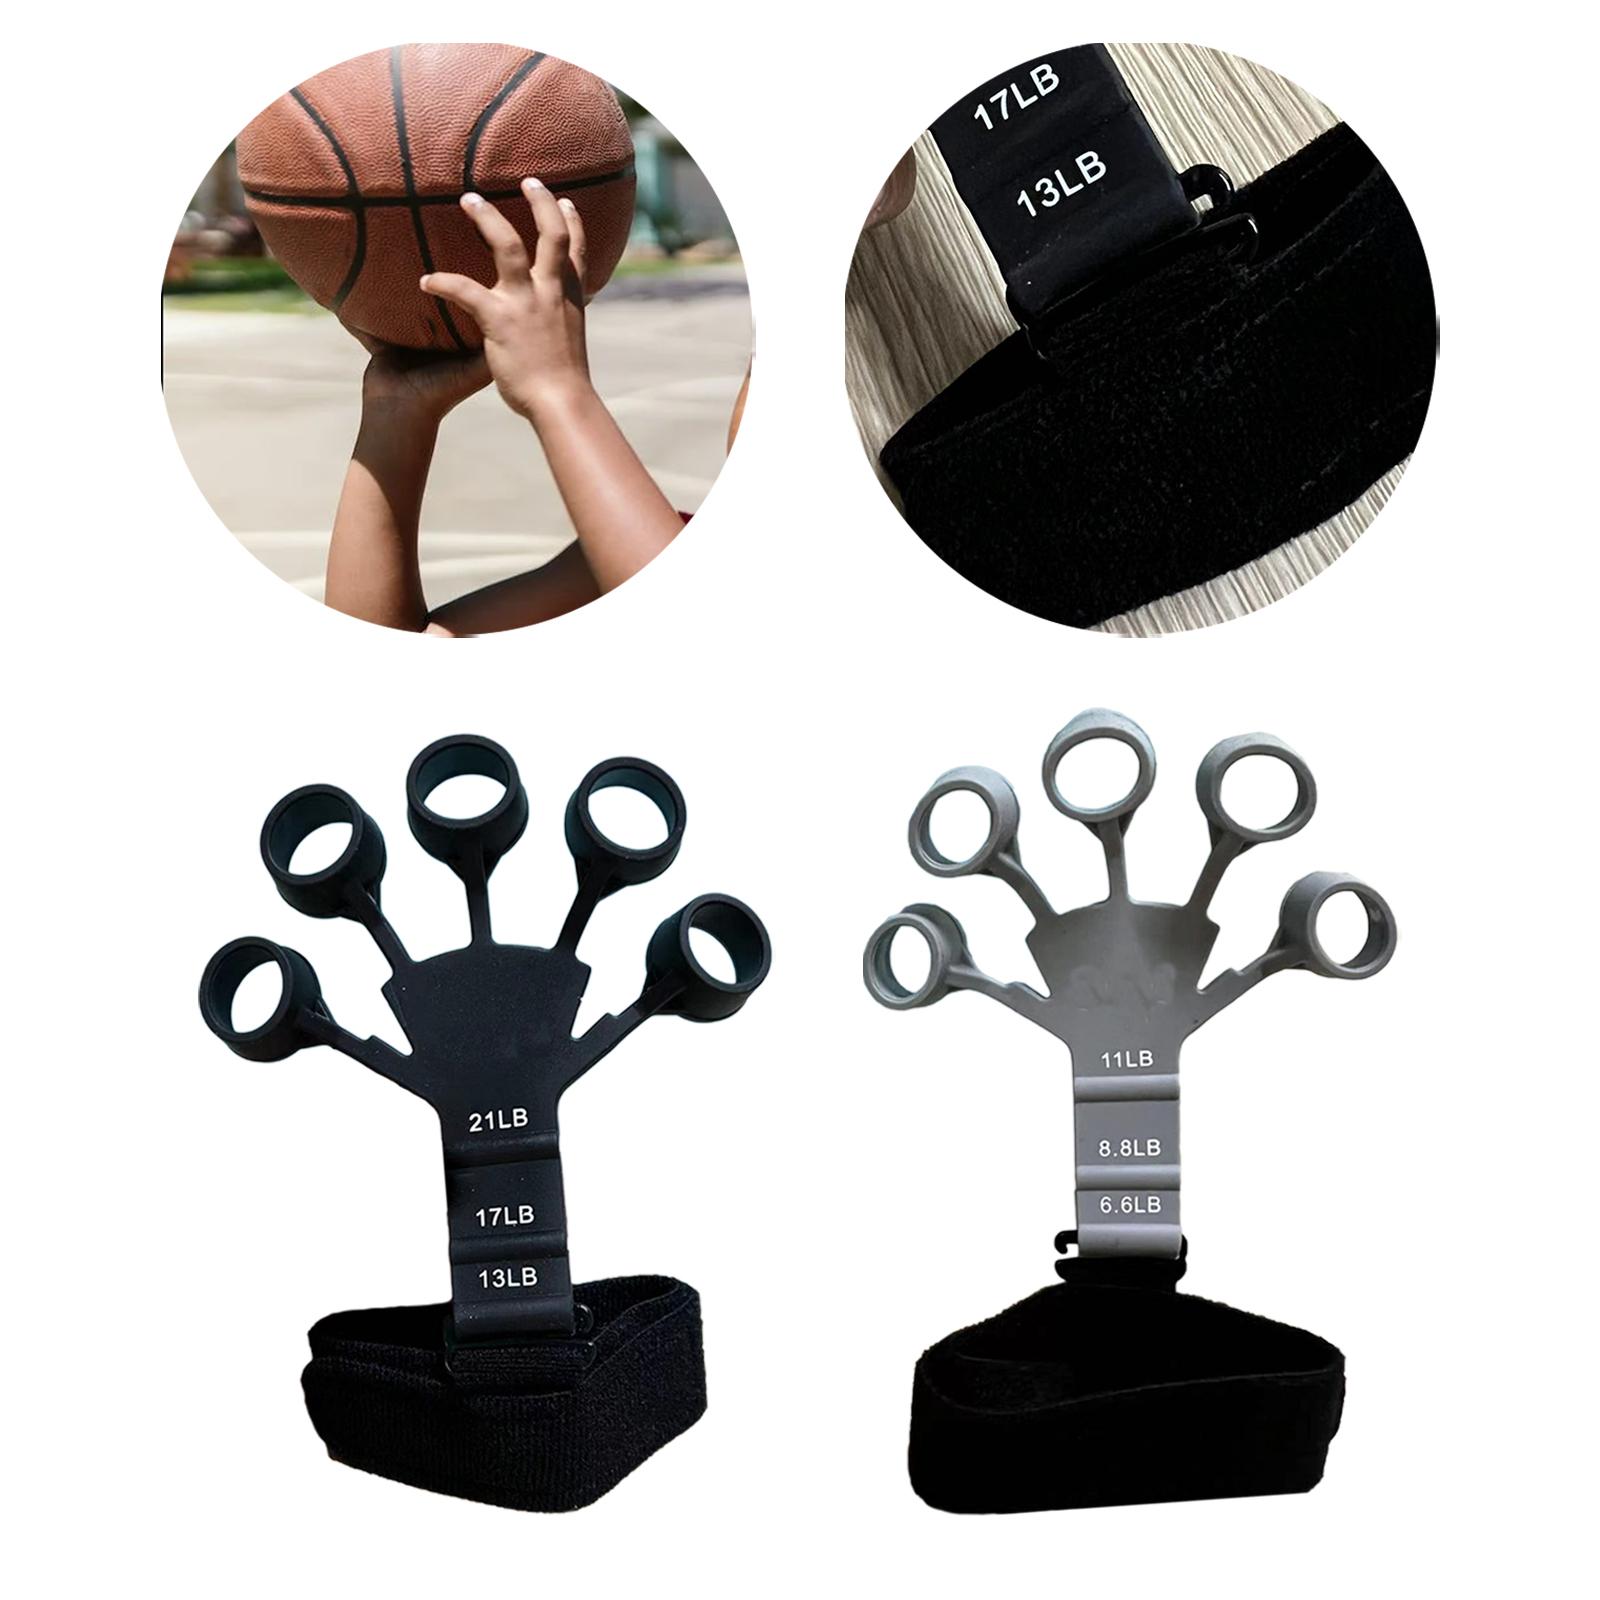 Hand Grip Strengthener Silicone Finger Exercise for Forearm Muscle Sports black and gray